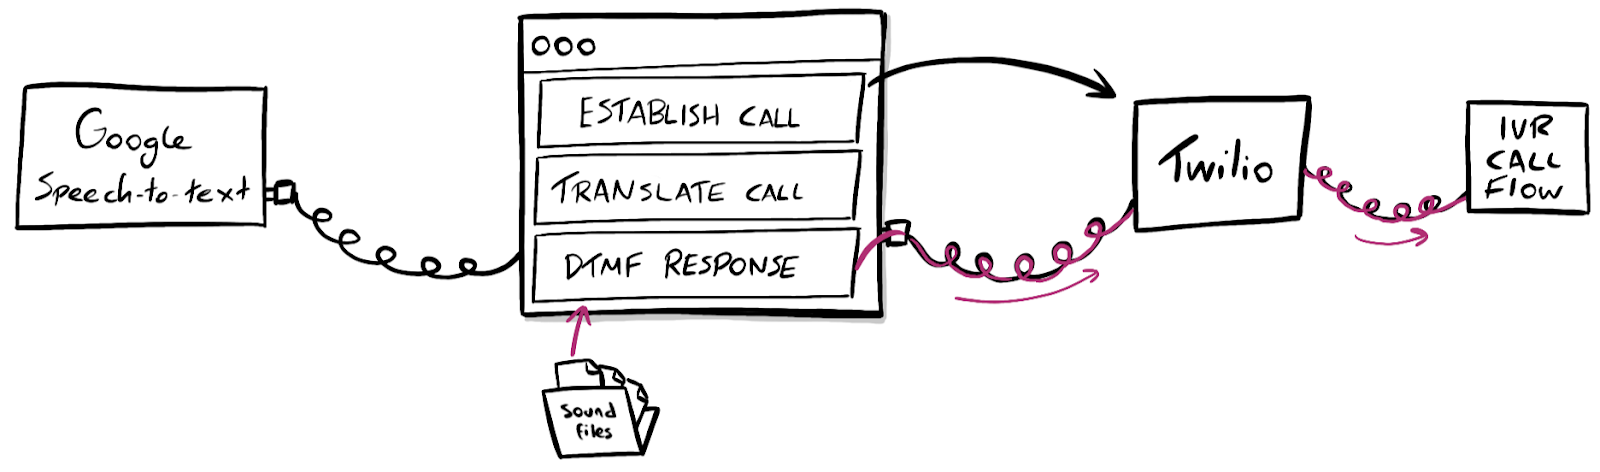 Automating how IVR call flows are tested